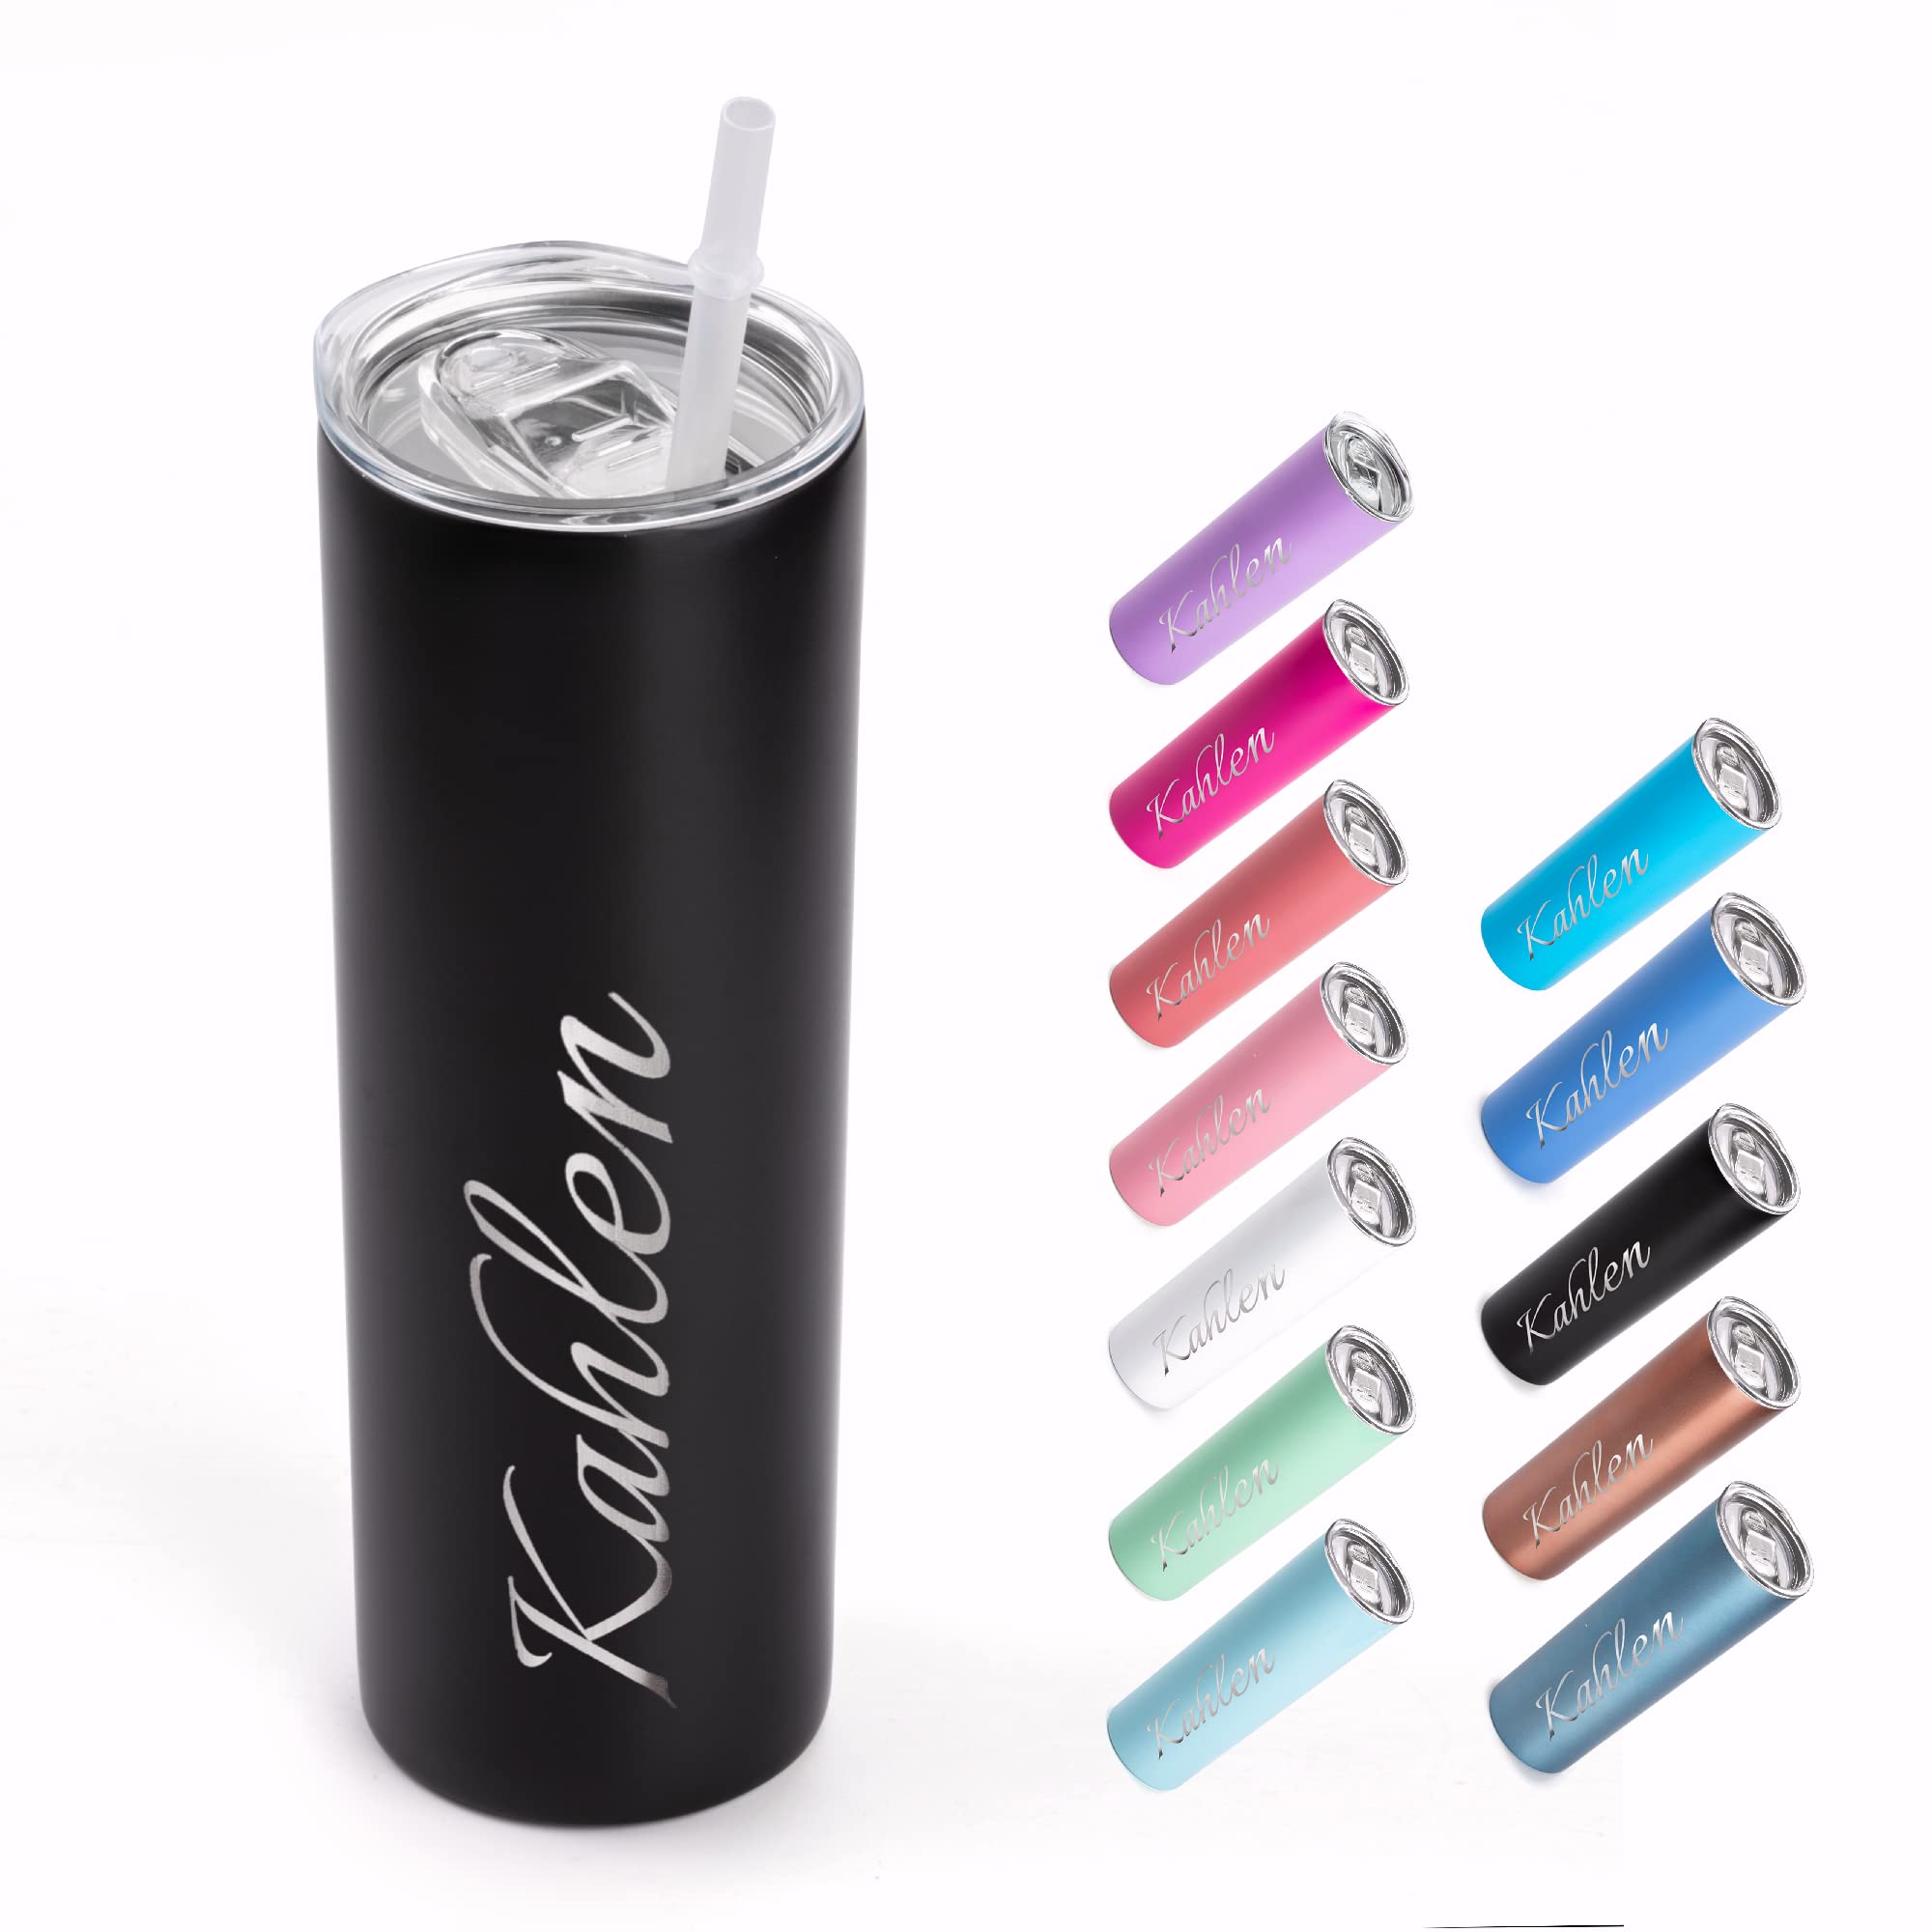 RUBIN Personalized Tumbler - Laser Engraved - 20oz Stainless Steel Skinny Tumbler - Includes Straw and Lid - Vacuum Insulated gift for